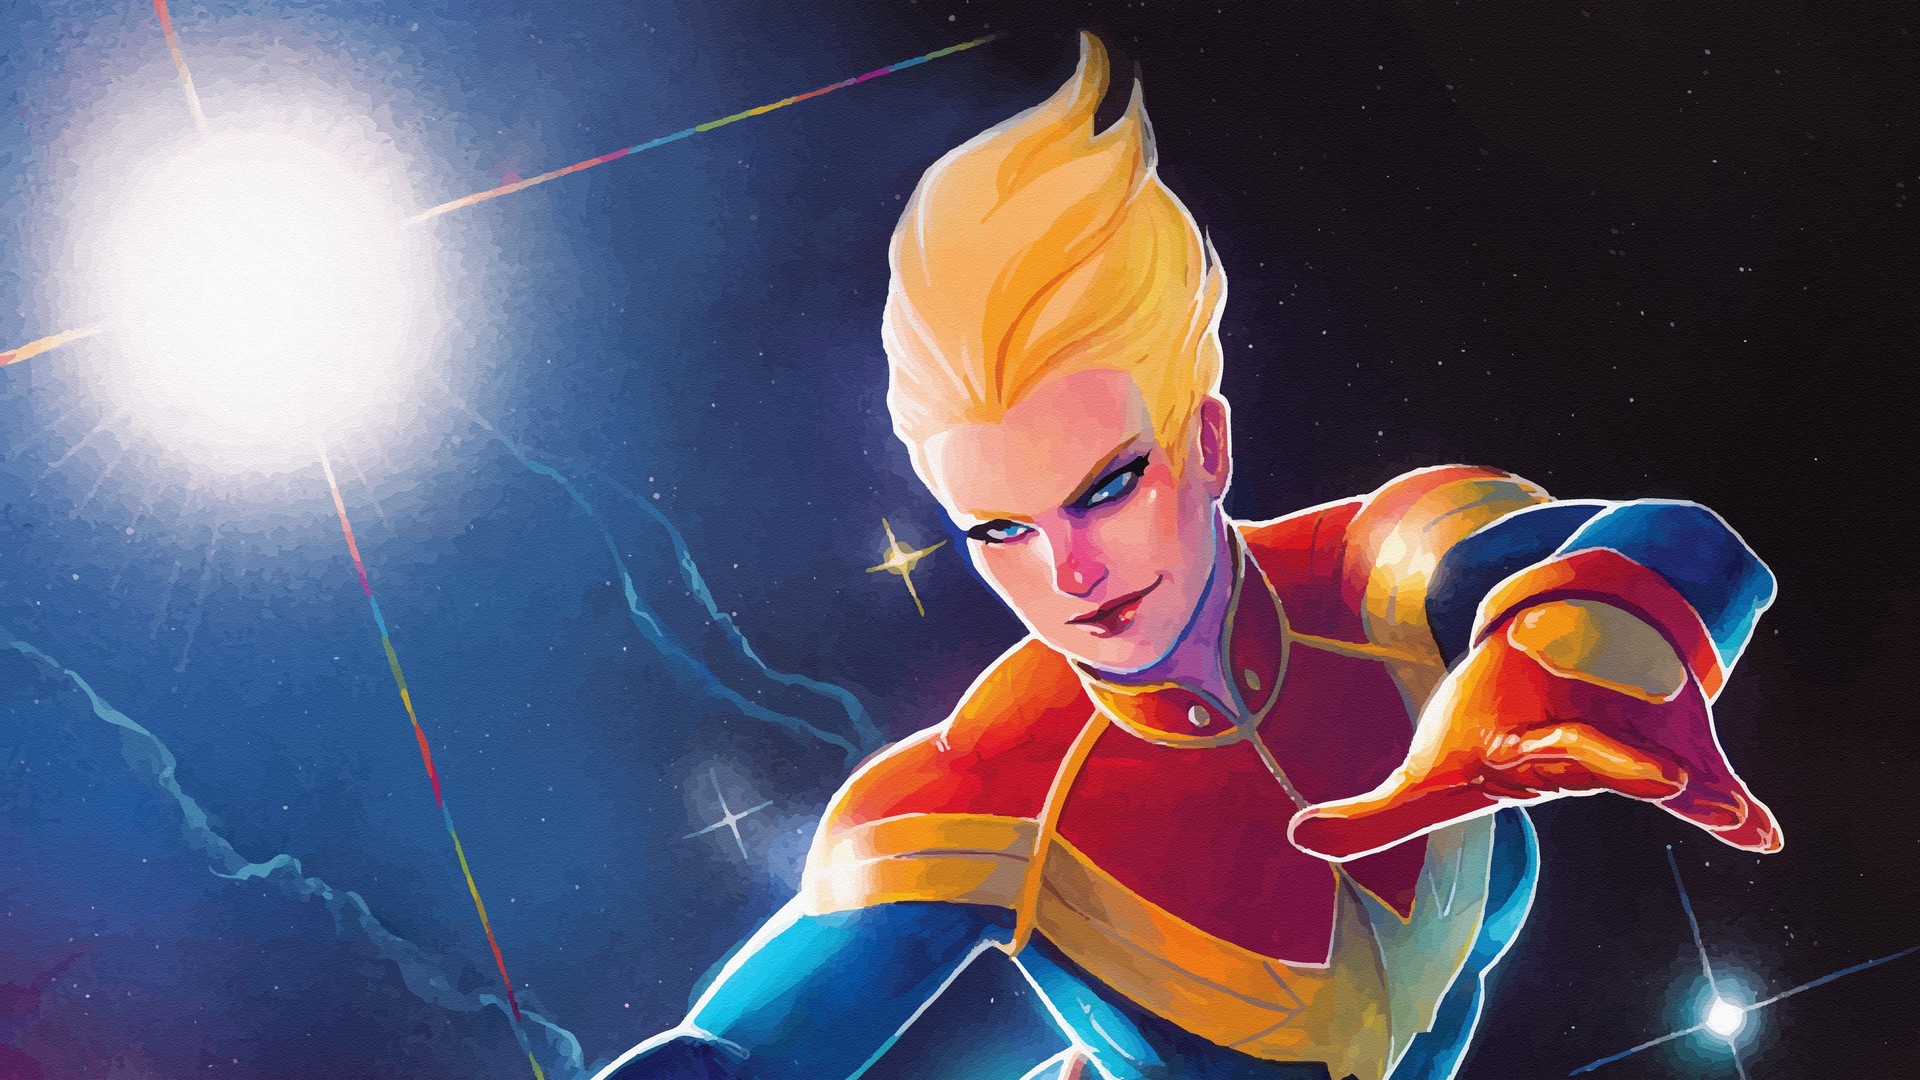 Captain Marvel Animated Background Wallpaper HD with high-resolution 1920x1080 pixel. You can use this wallpaper for your Desktop Computer Backgrounds, Mac Wallpapers, Android Lock screen or iPhone Screensavers and another smartphone device